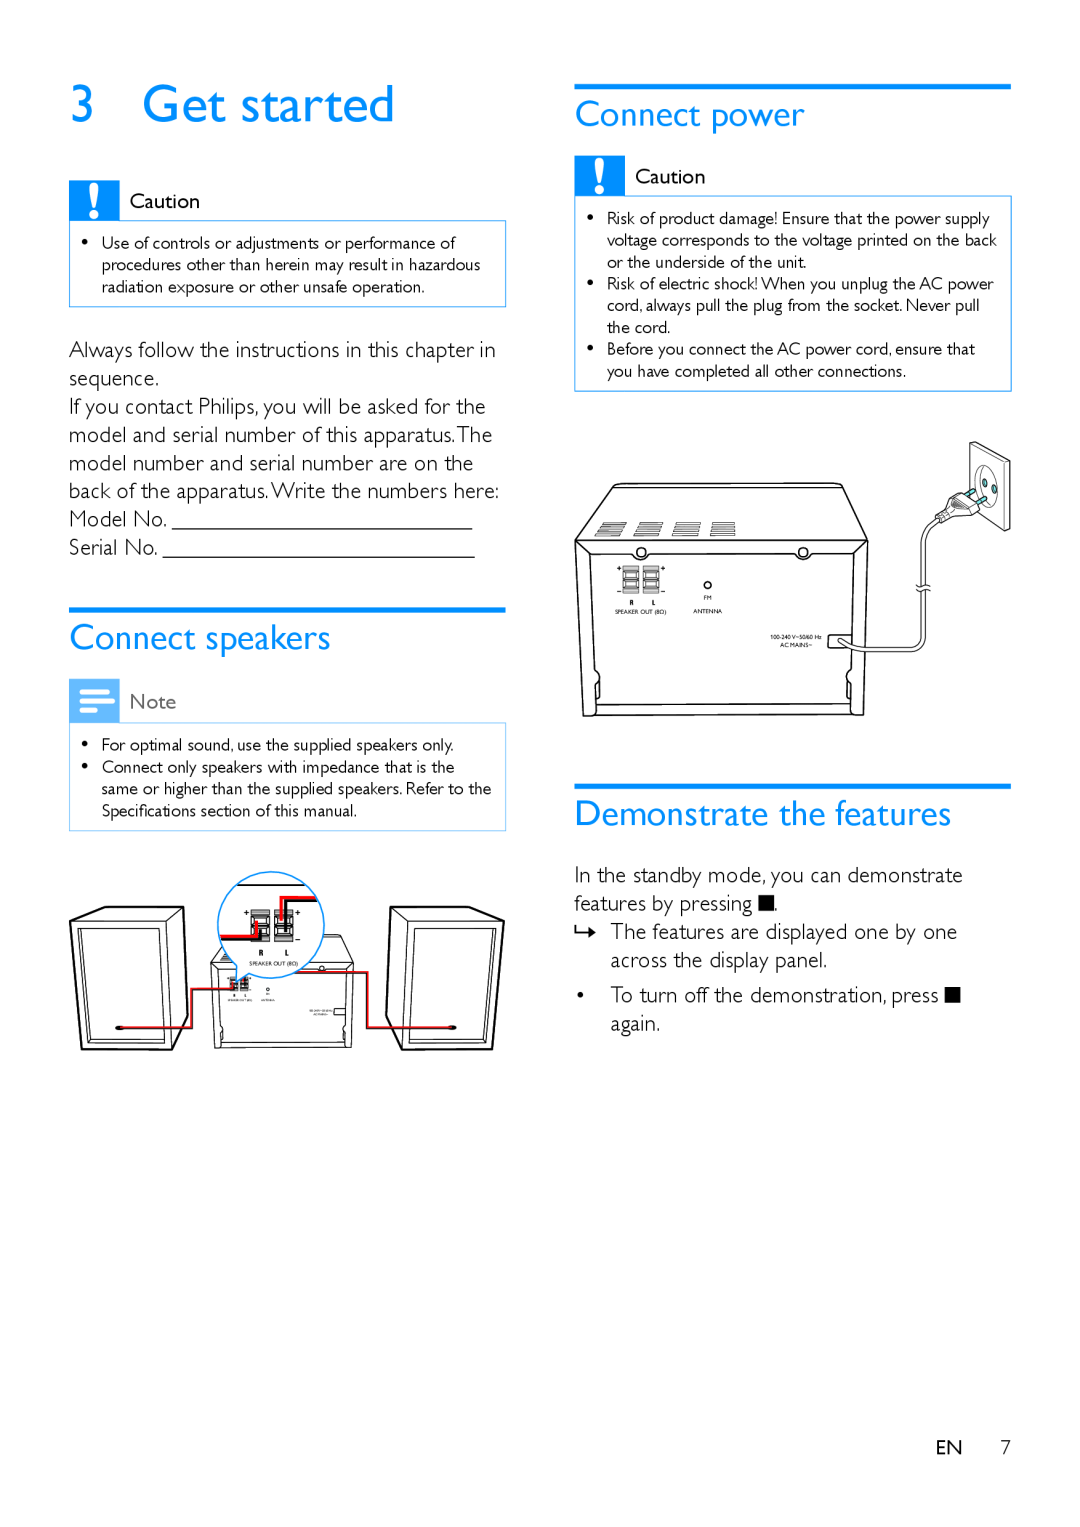 Philips MCM2150 user manual Get started, Connect speakers, Connect power, Demonstrate the features 